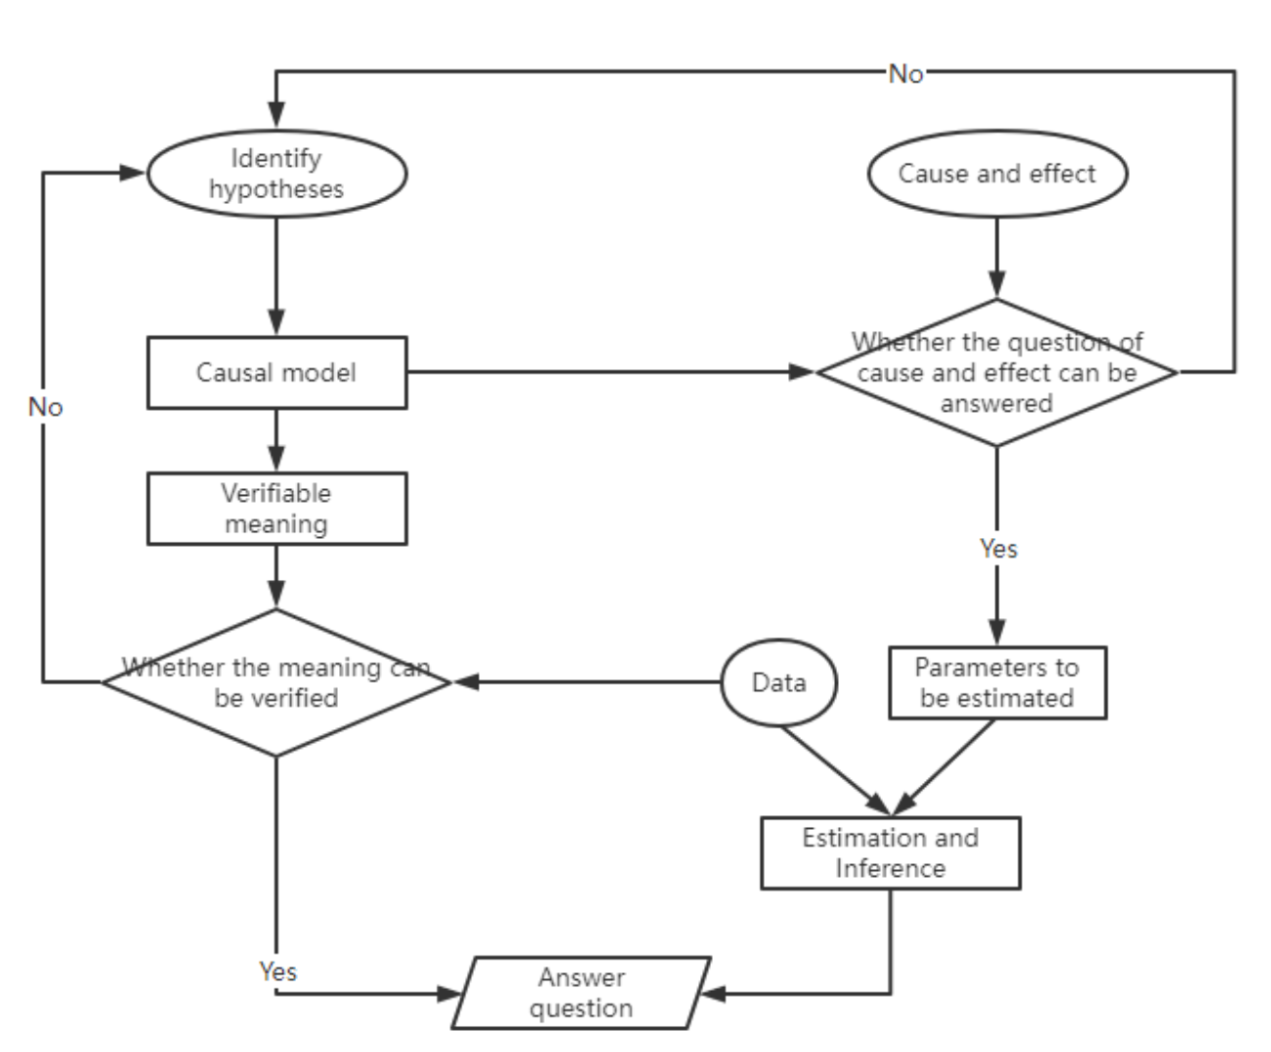 A flowchart showing the process of causal inference